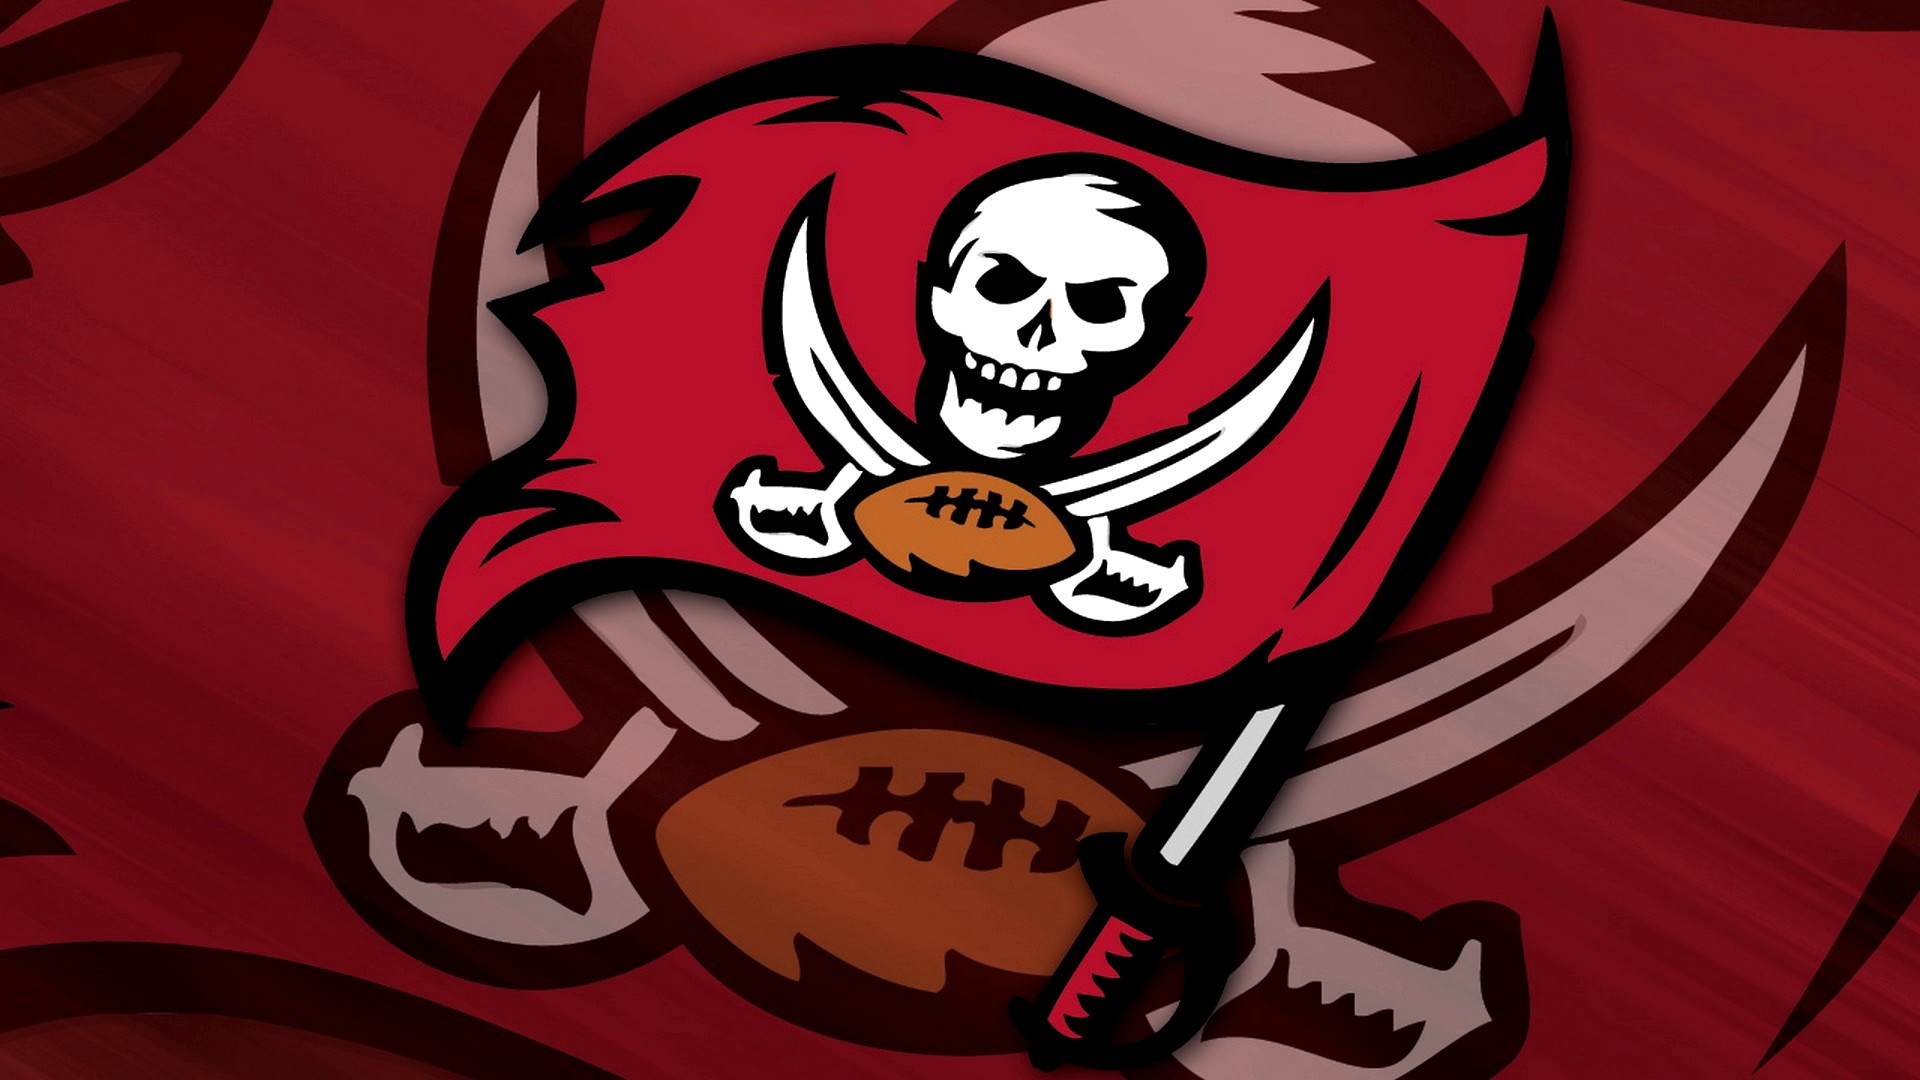 Best Tampa Bay Buccaneers Wallpaper in HD with high-resolution 1920x1080 pixel. You can use and set as wallpaper for Notebook Screensavers, Mac Wallpapers, Mobile Home Screen, iPhone or Android Phones Lock Screen